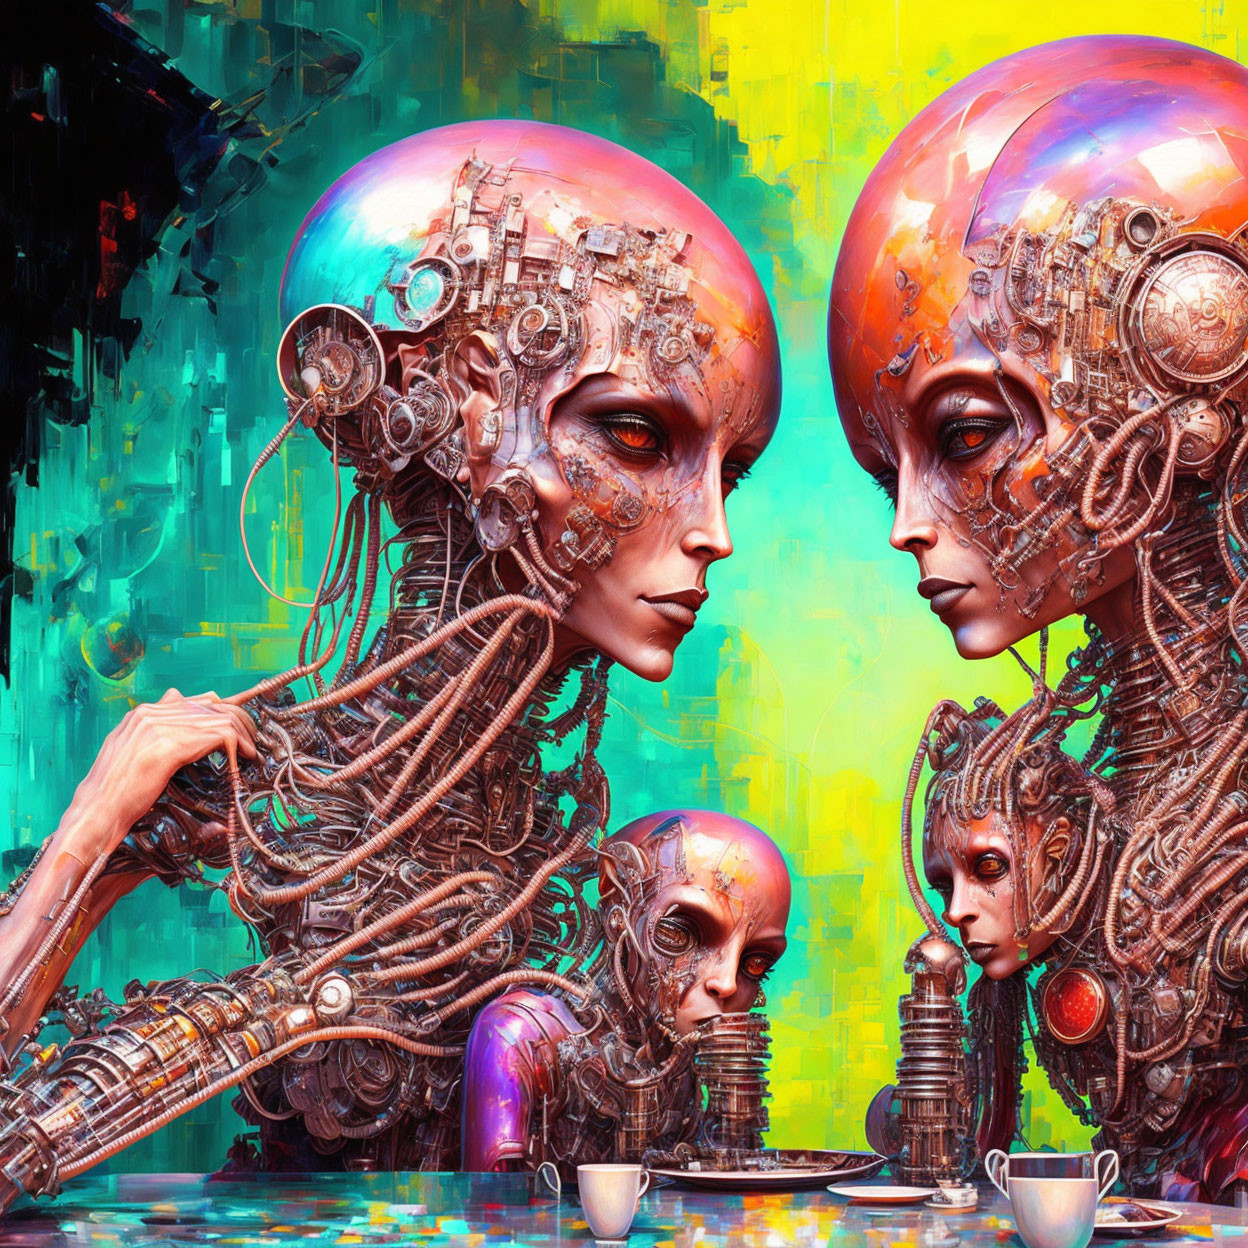 Colorful Artwork: Two Mechanical Beings with Cyborg Heads, Profile View